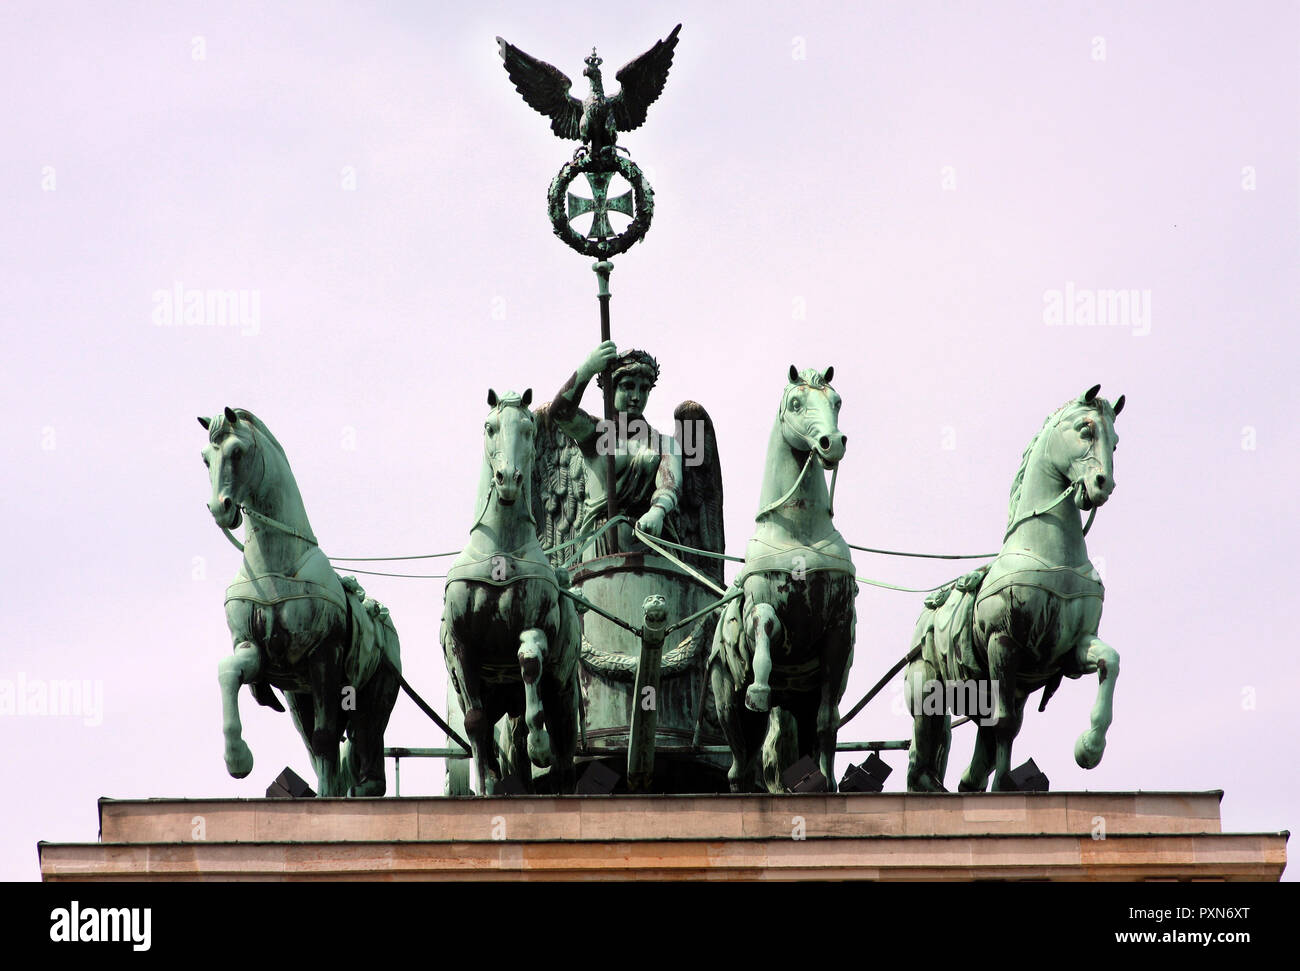 Queen Quadriga, her for horses and chariot. sit on top of the Brandenburg Gate monument in the German city of Berlin. Stock Photo